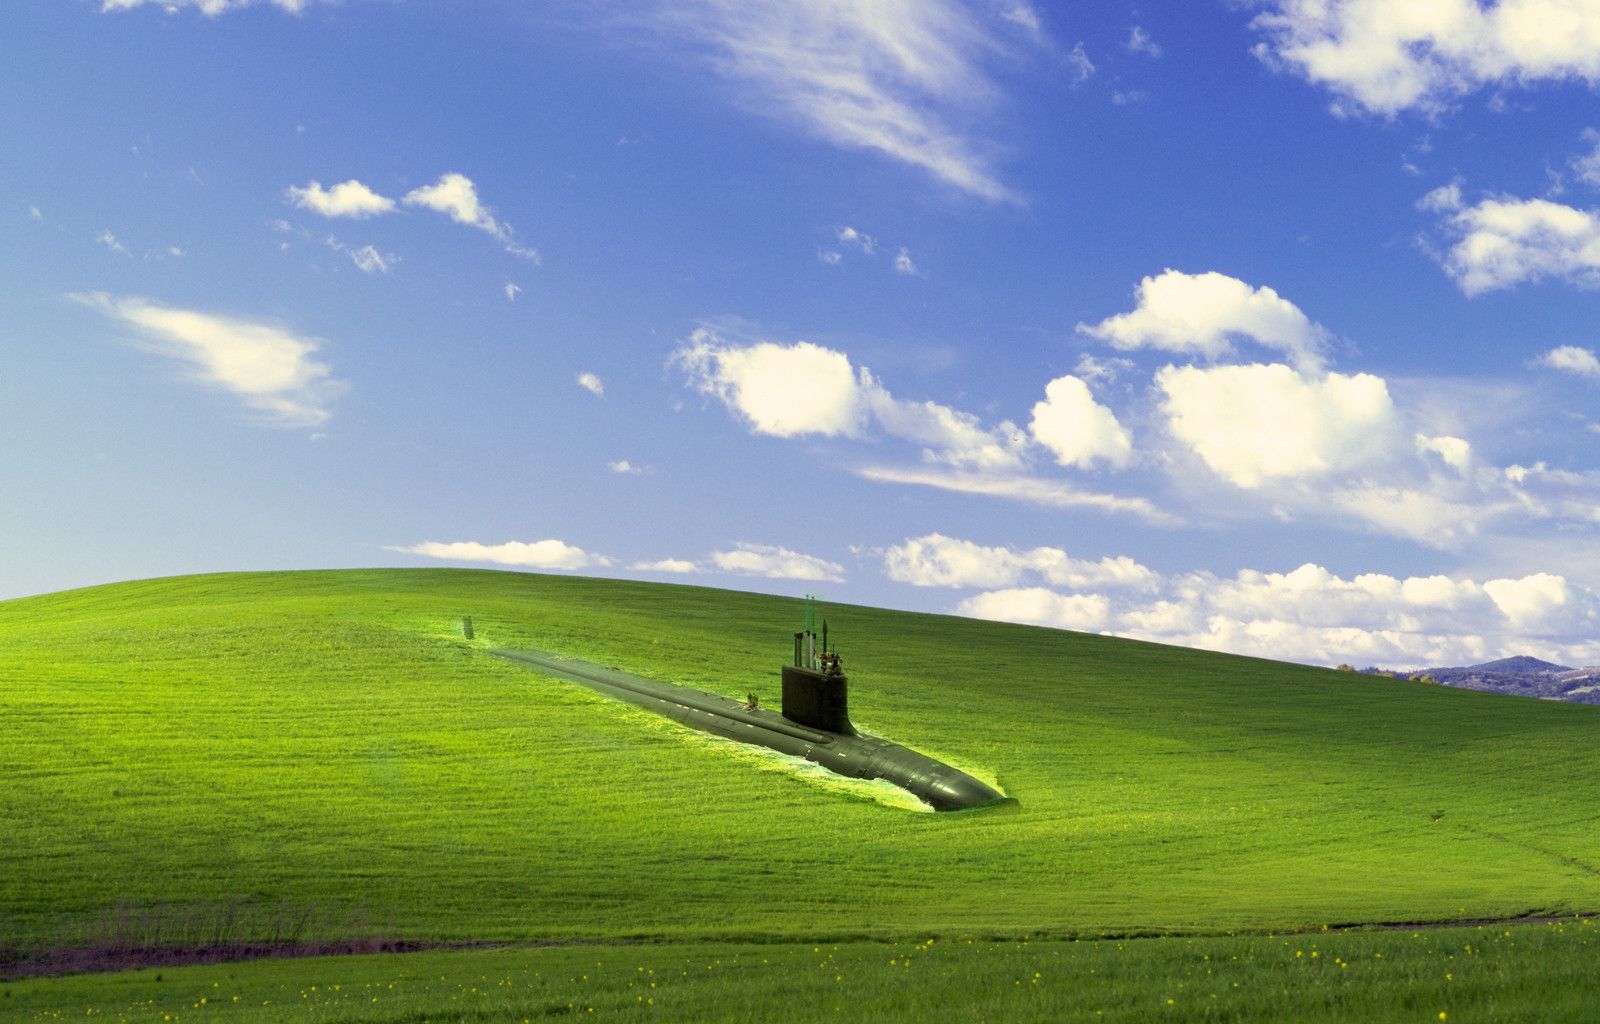 It’s bye bye for Windows XP as support for Embedded POSReady 2009 ends today